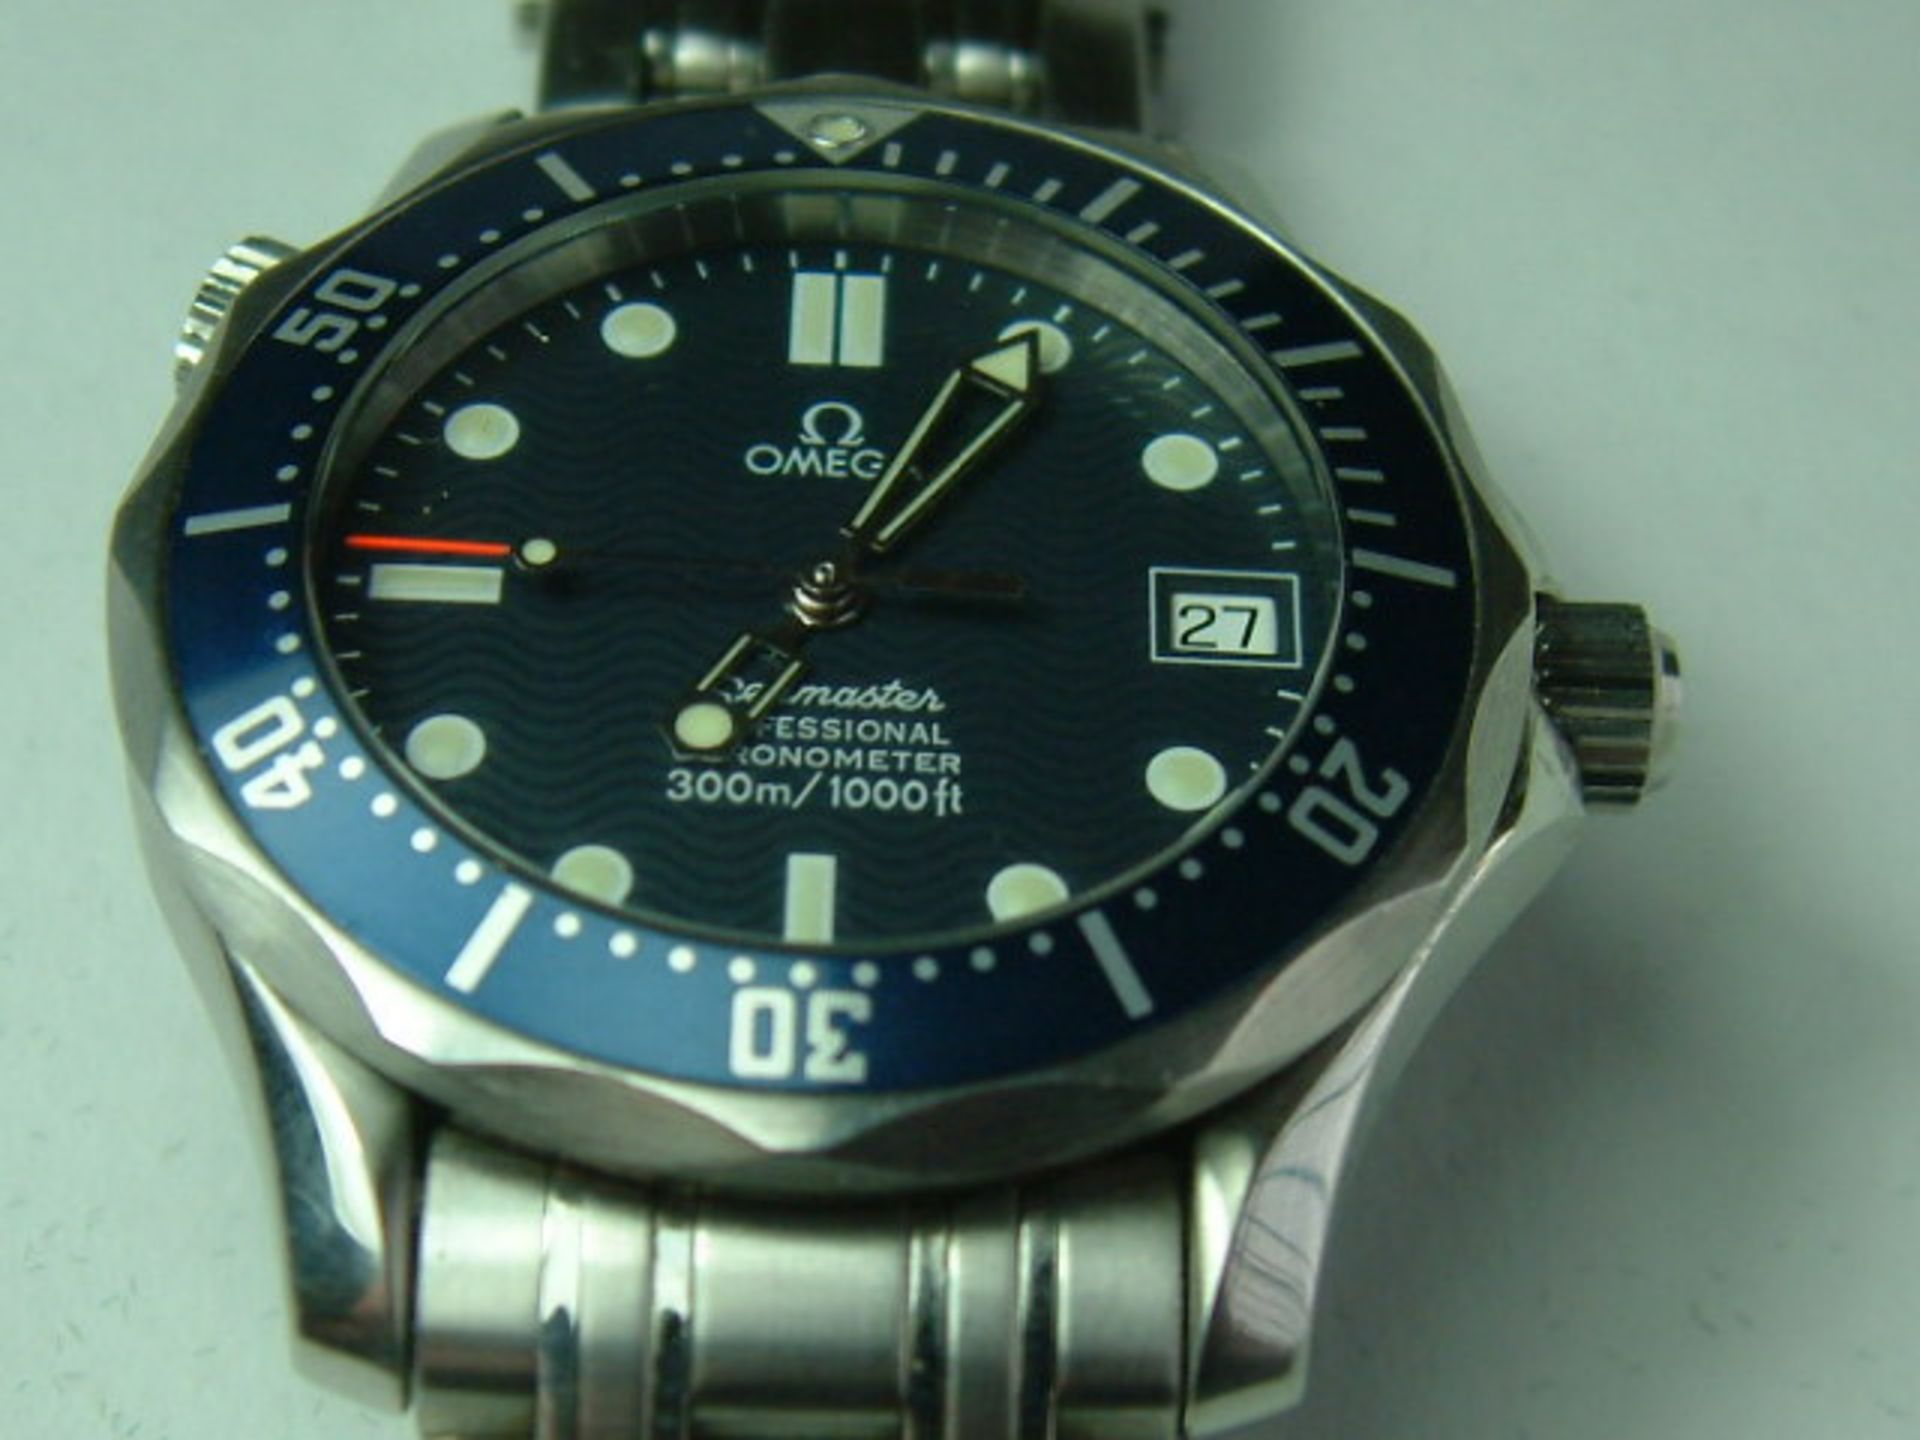 Omega Seamaster Professional 300M Co/Axial Automatic Gents Wristwatch - Image 4 of 5